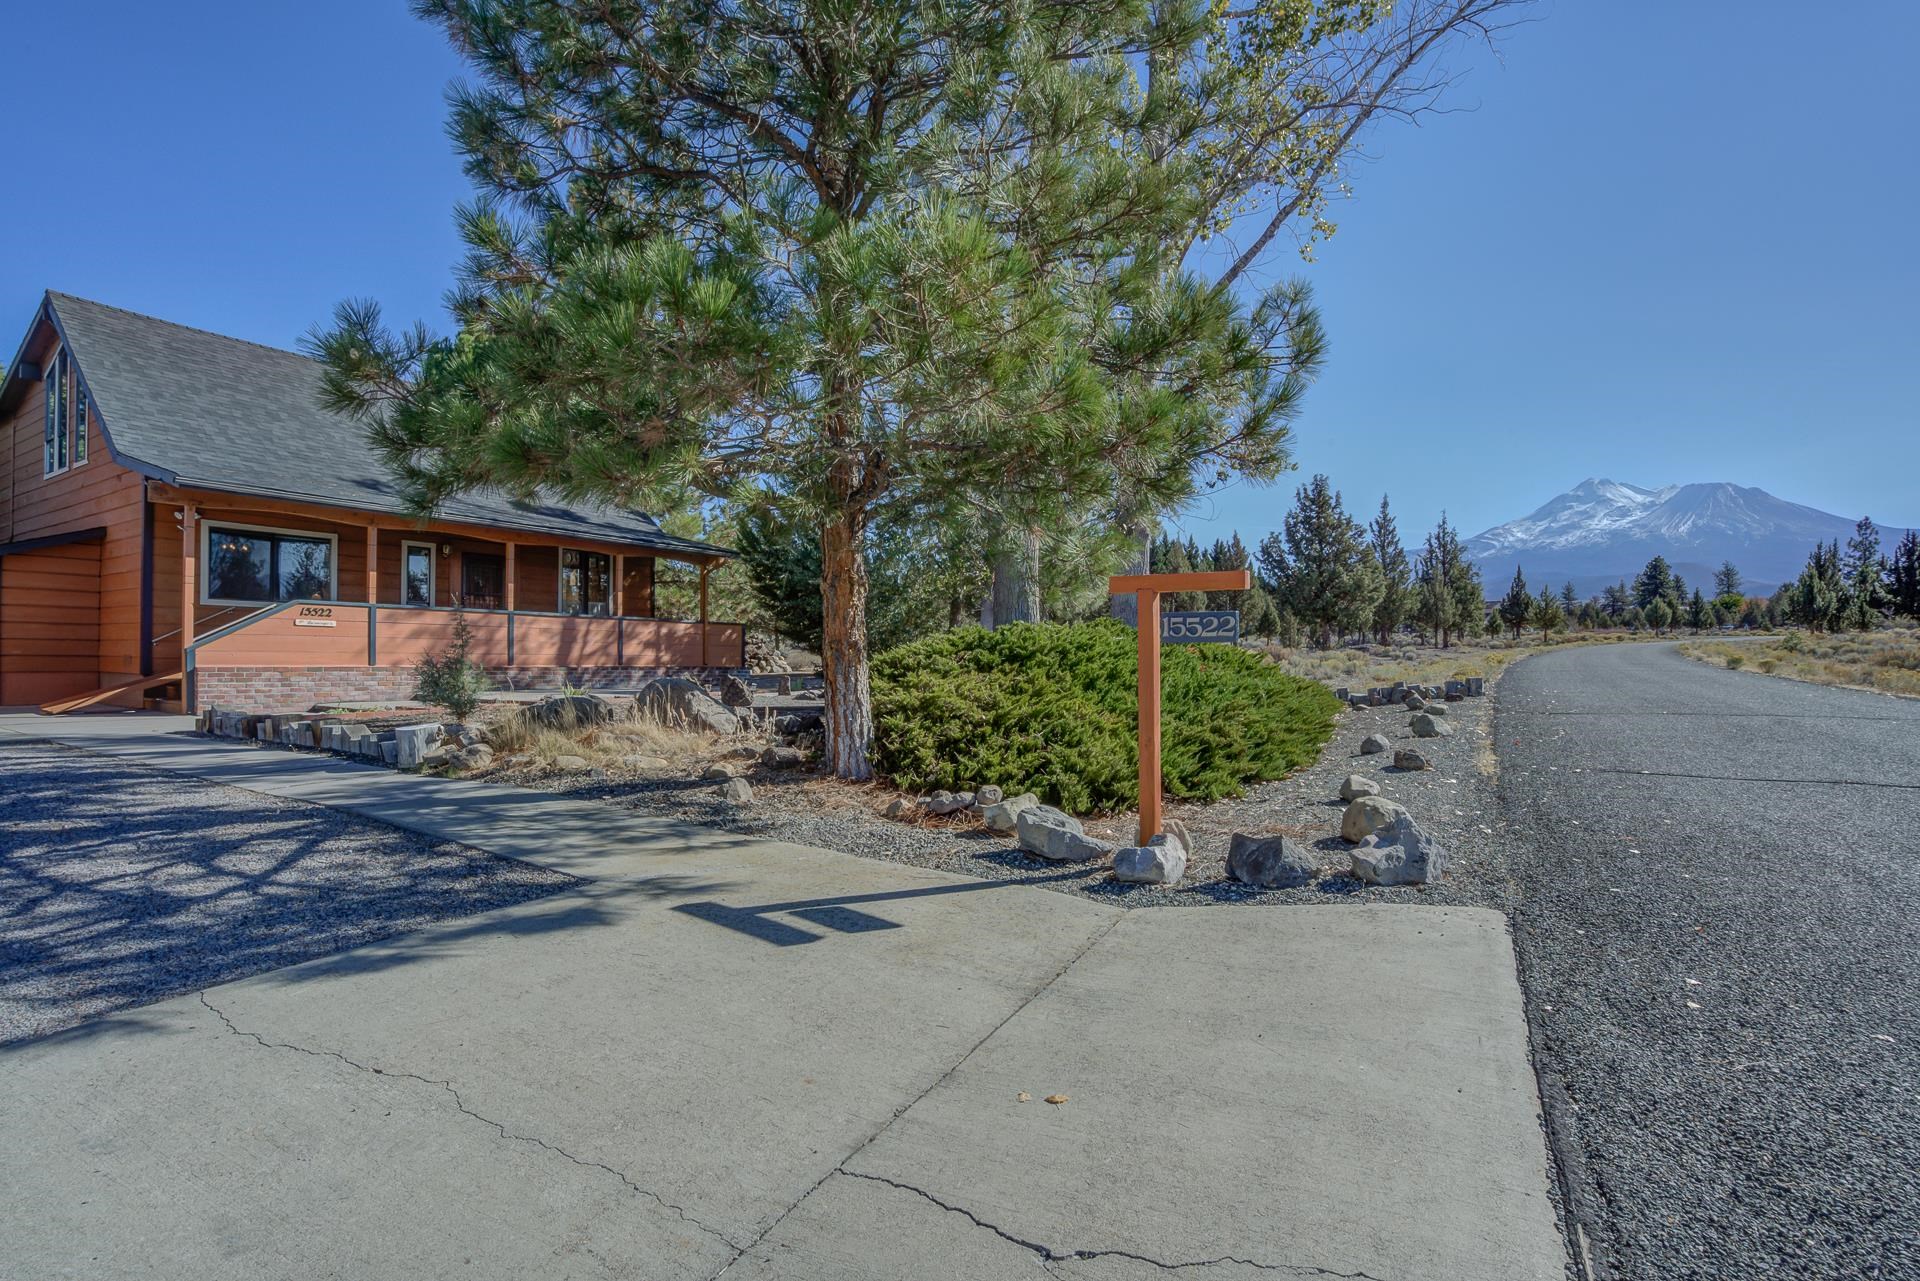 This beautiful craftsman style home has many elements traditionally found in a log cabin. Lots of windows make it bright with a view of Mt Shasta. The Livingroom has a corner pellet stove and vaulted ceilings that open into the library upstairs. Kitchen has an ample amount of counter space, a small breakfast bar, large walk-through pantry leading to an enclosed sun porch that overlooks the back yard. First floor oversized master bedroom has a large walk-in closet, seating area and private entrance. The second downstairs bedroom is currently being used as a den with large windows that face Sherwood. Great room is located upstairs with the third bedroom, walk-in closet and second full bathroom. The unique library/reading nook is cozy with a balcony that overlooks the first floor. Homeowner thoughtfully equipped the staircase with a chairlift to aide his spouse with access to the second floor. The landscaping was designed to fit the area and contains many water features. This MUST-SEE listing reflects the love and devotion this couple had for their home.